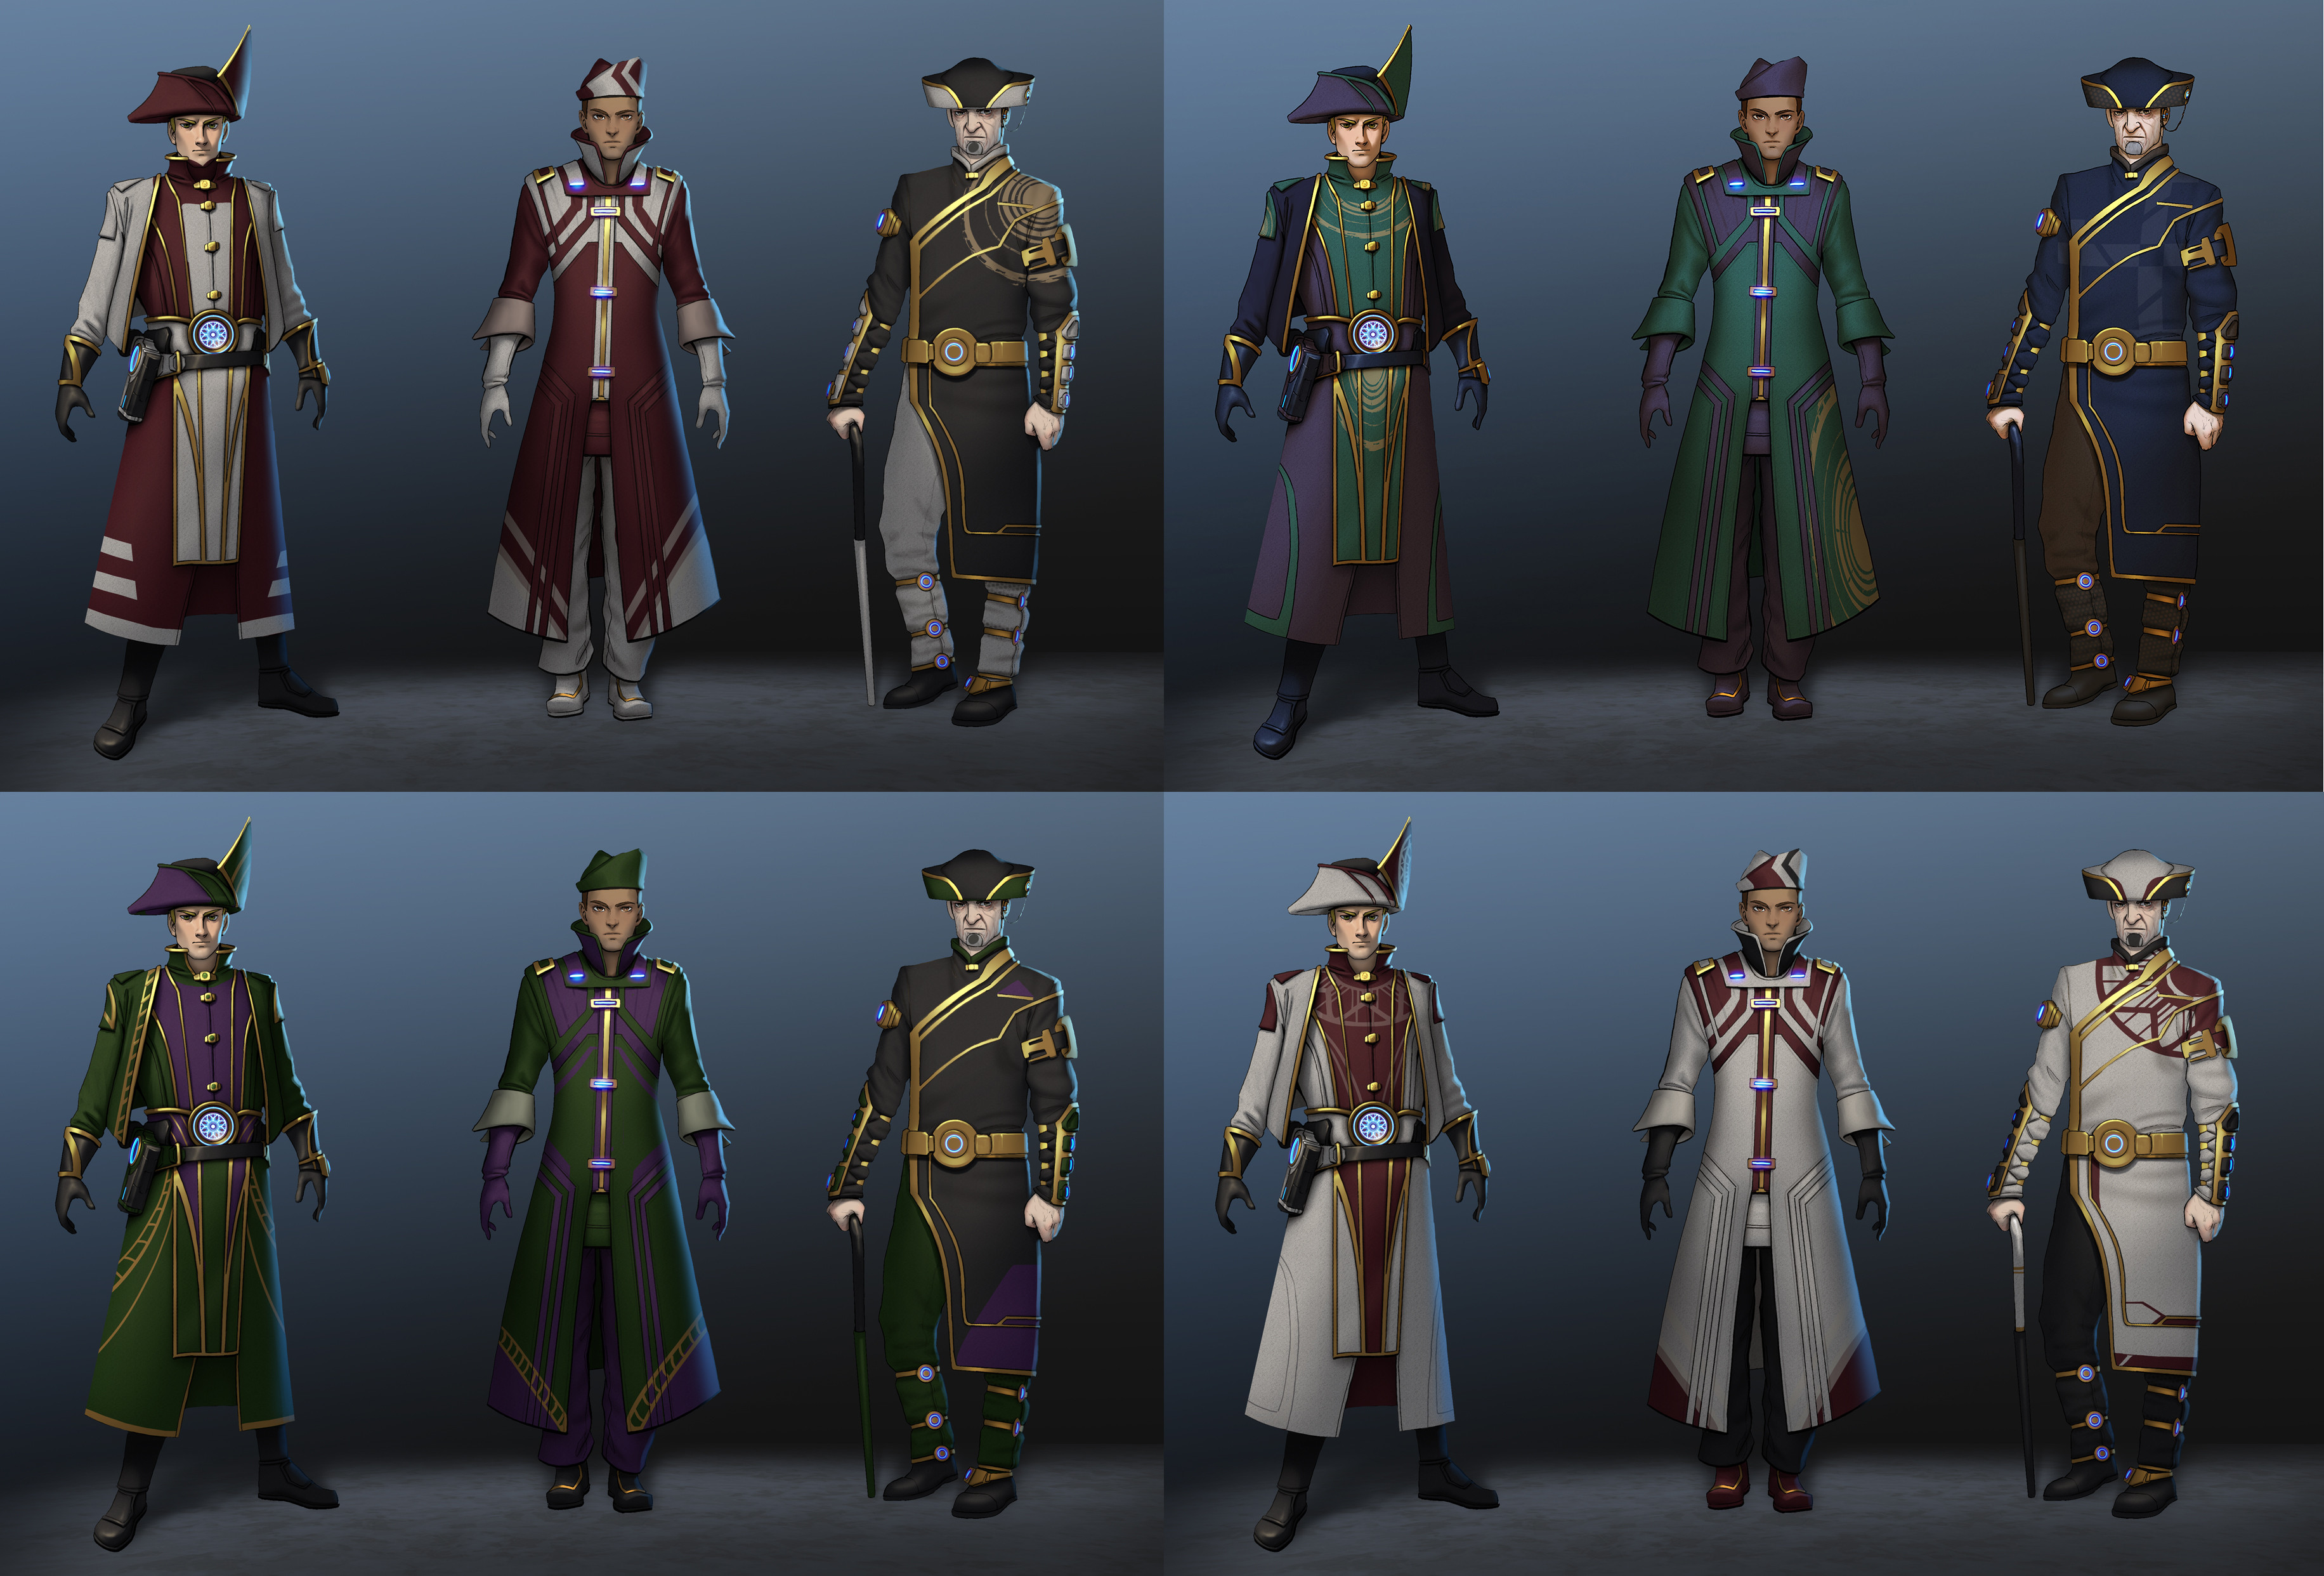 Various designs for the men